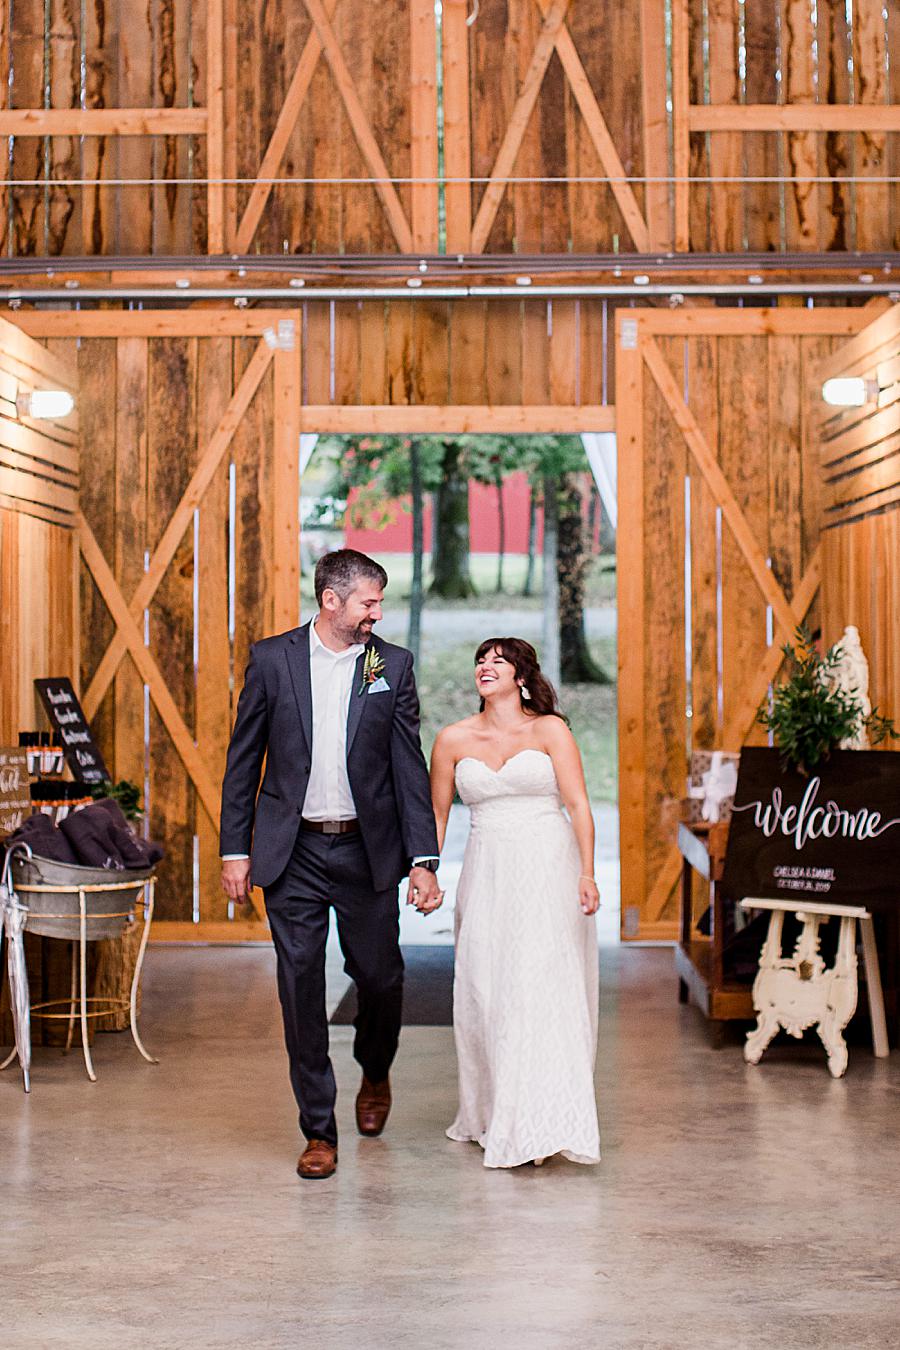 Intro to reception at this RiverView Family Farm wedding by Knoxville Wedding Photographer, Amanda May Photos.